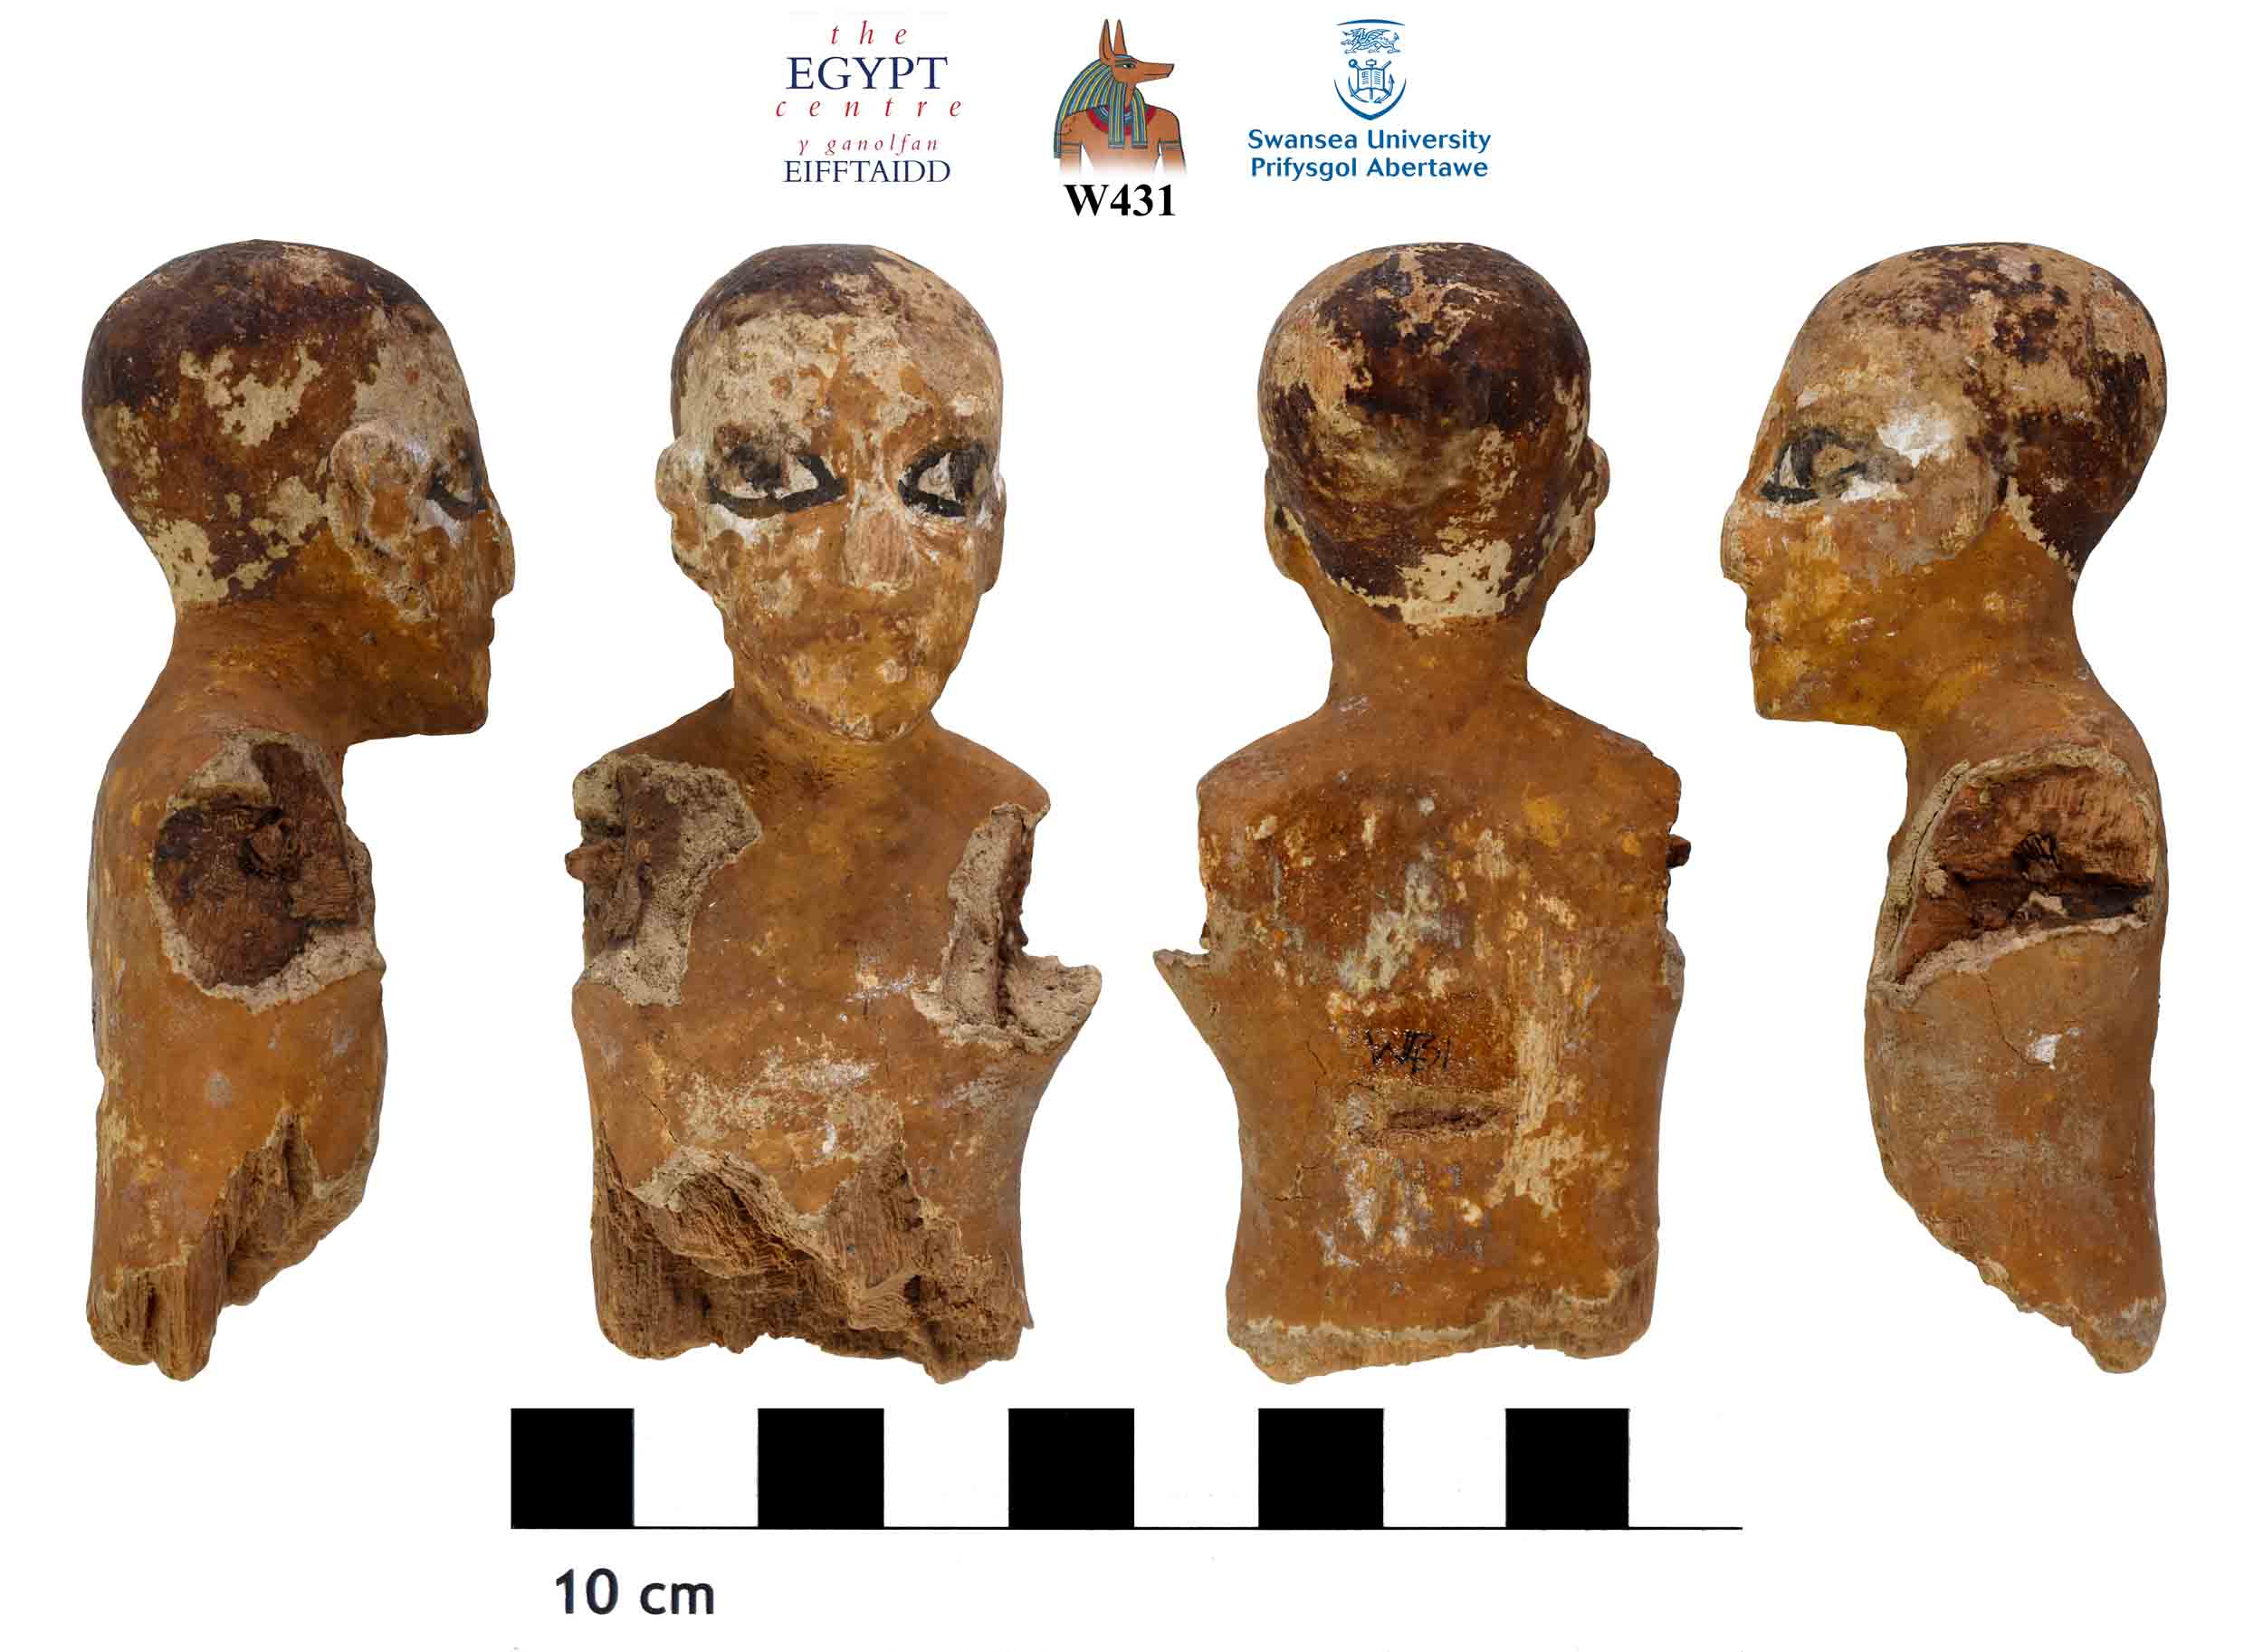 Image for: Upper portion of a wooden funerary figure